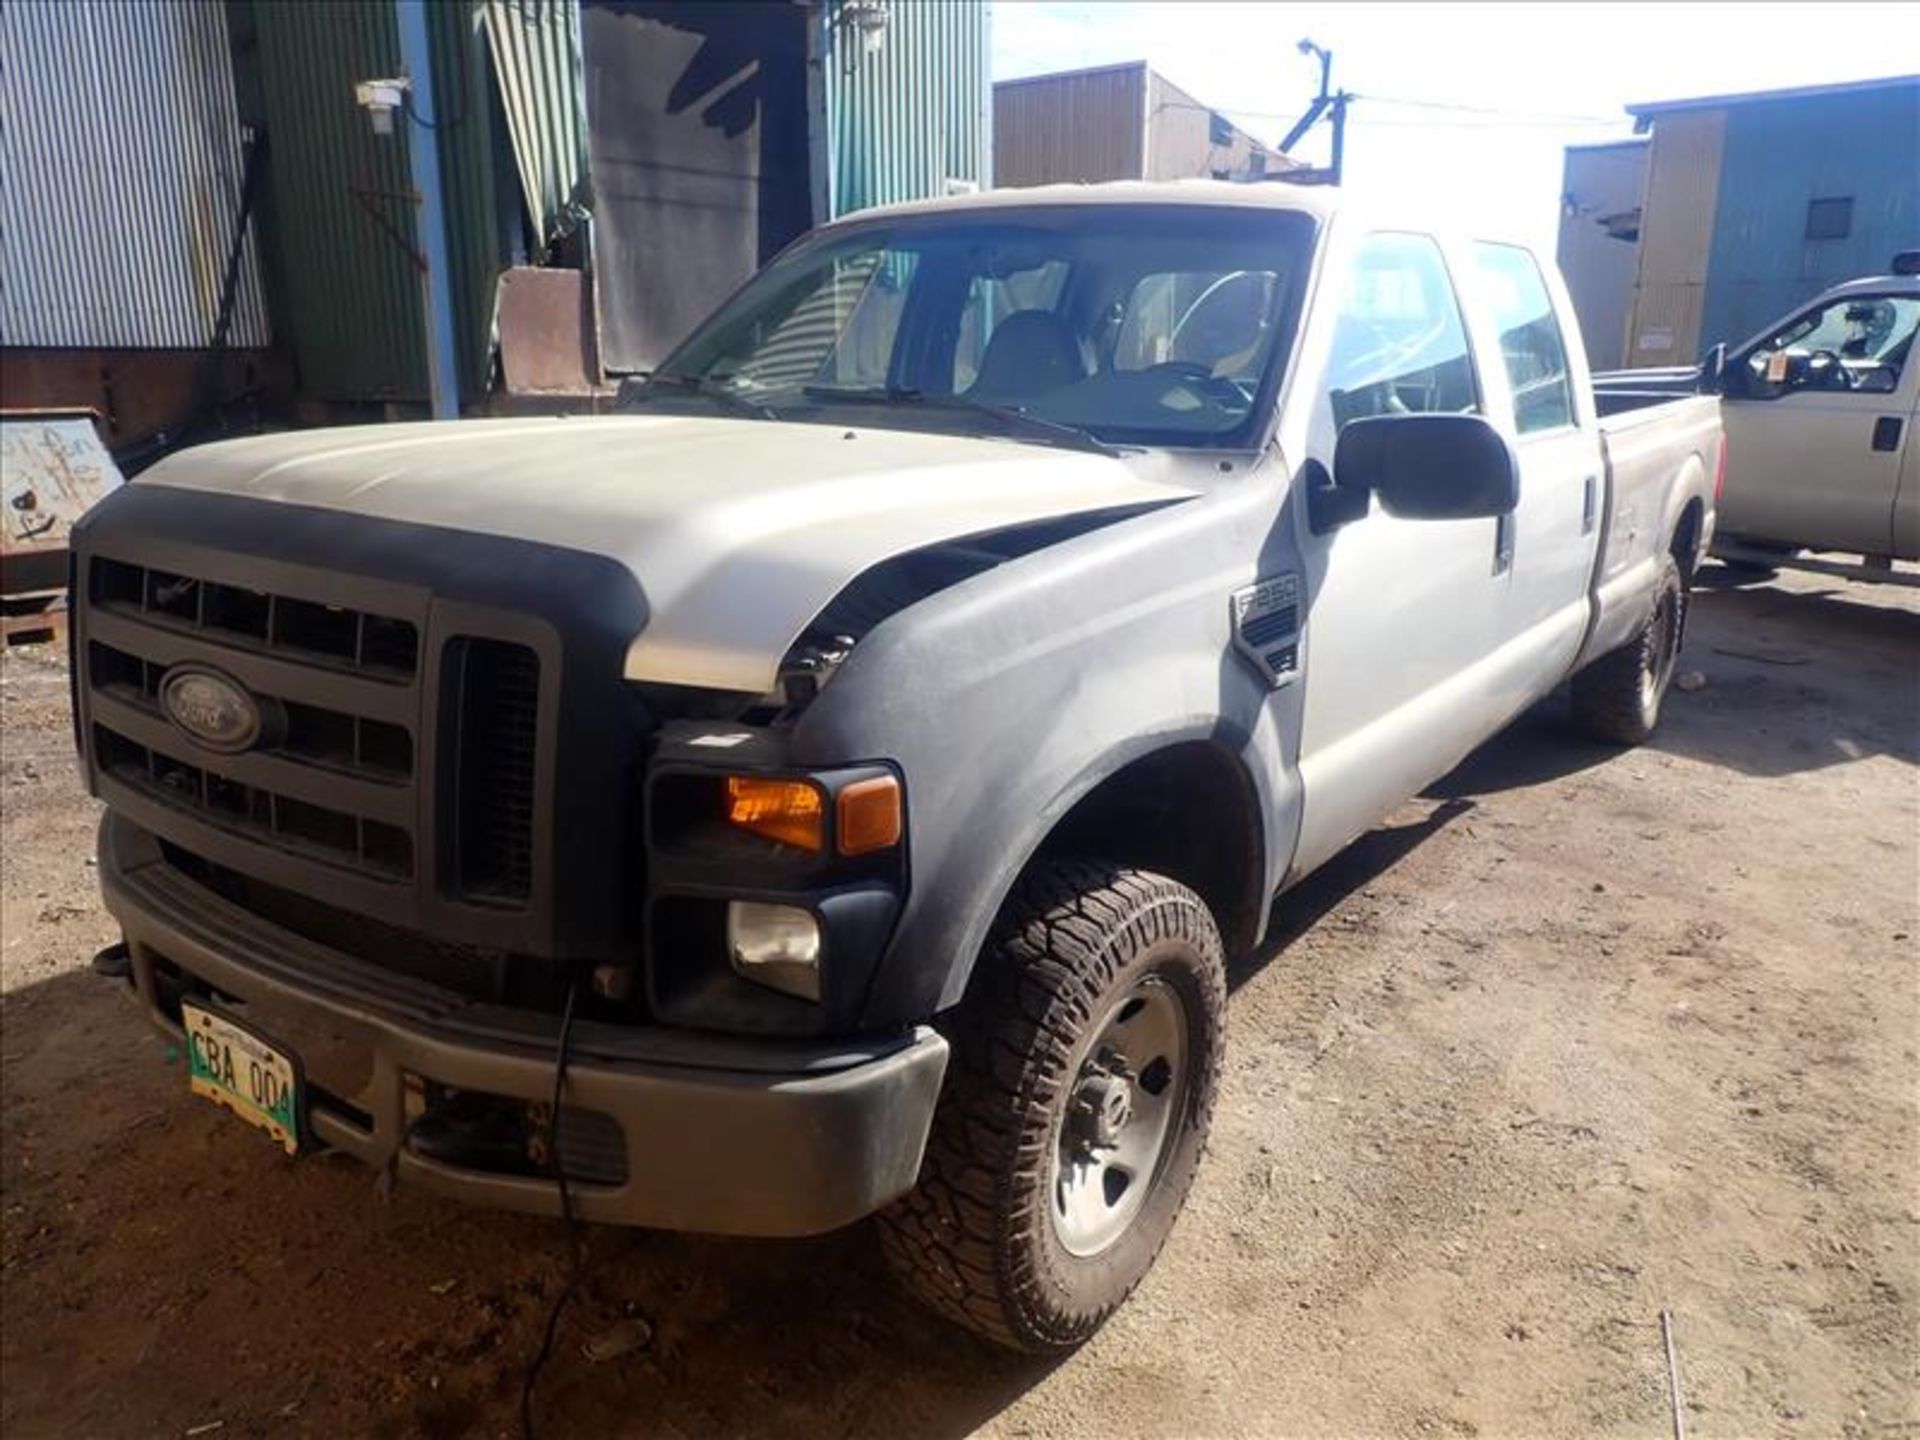 2008 Ford F250 XL SuperDuty pick-up truck, VIN 1FTSW21528EB74521, approx. 103000 km, crew-cab,